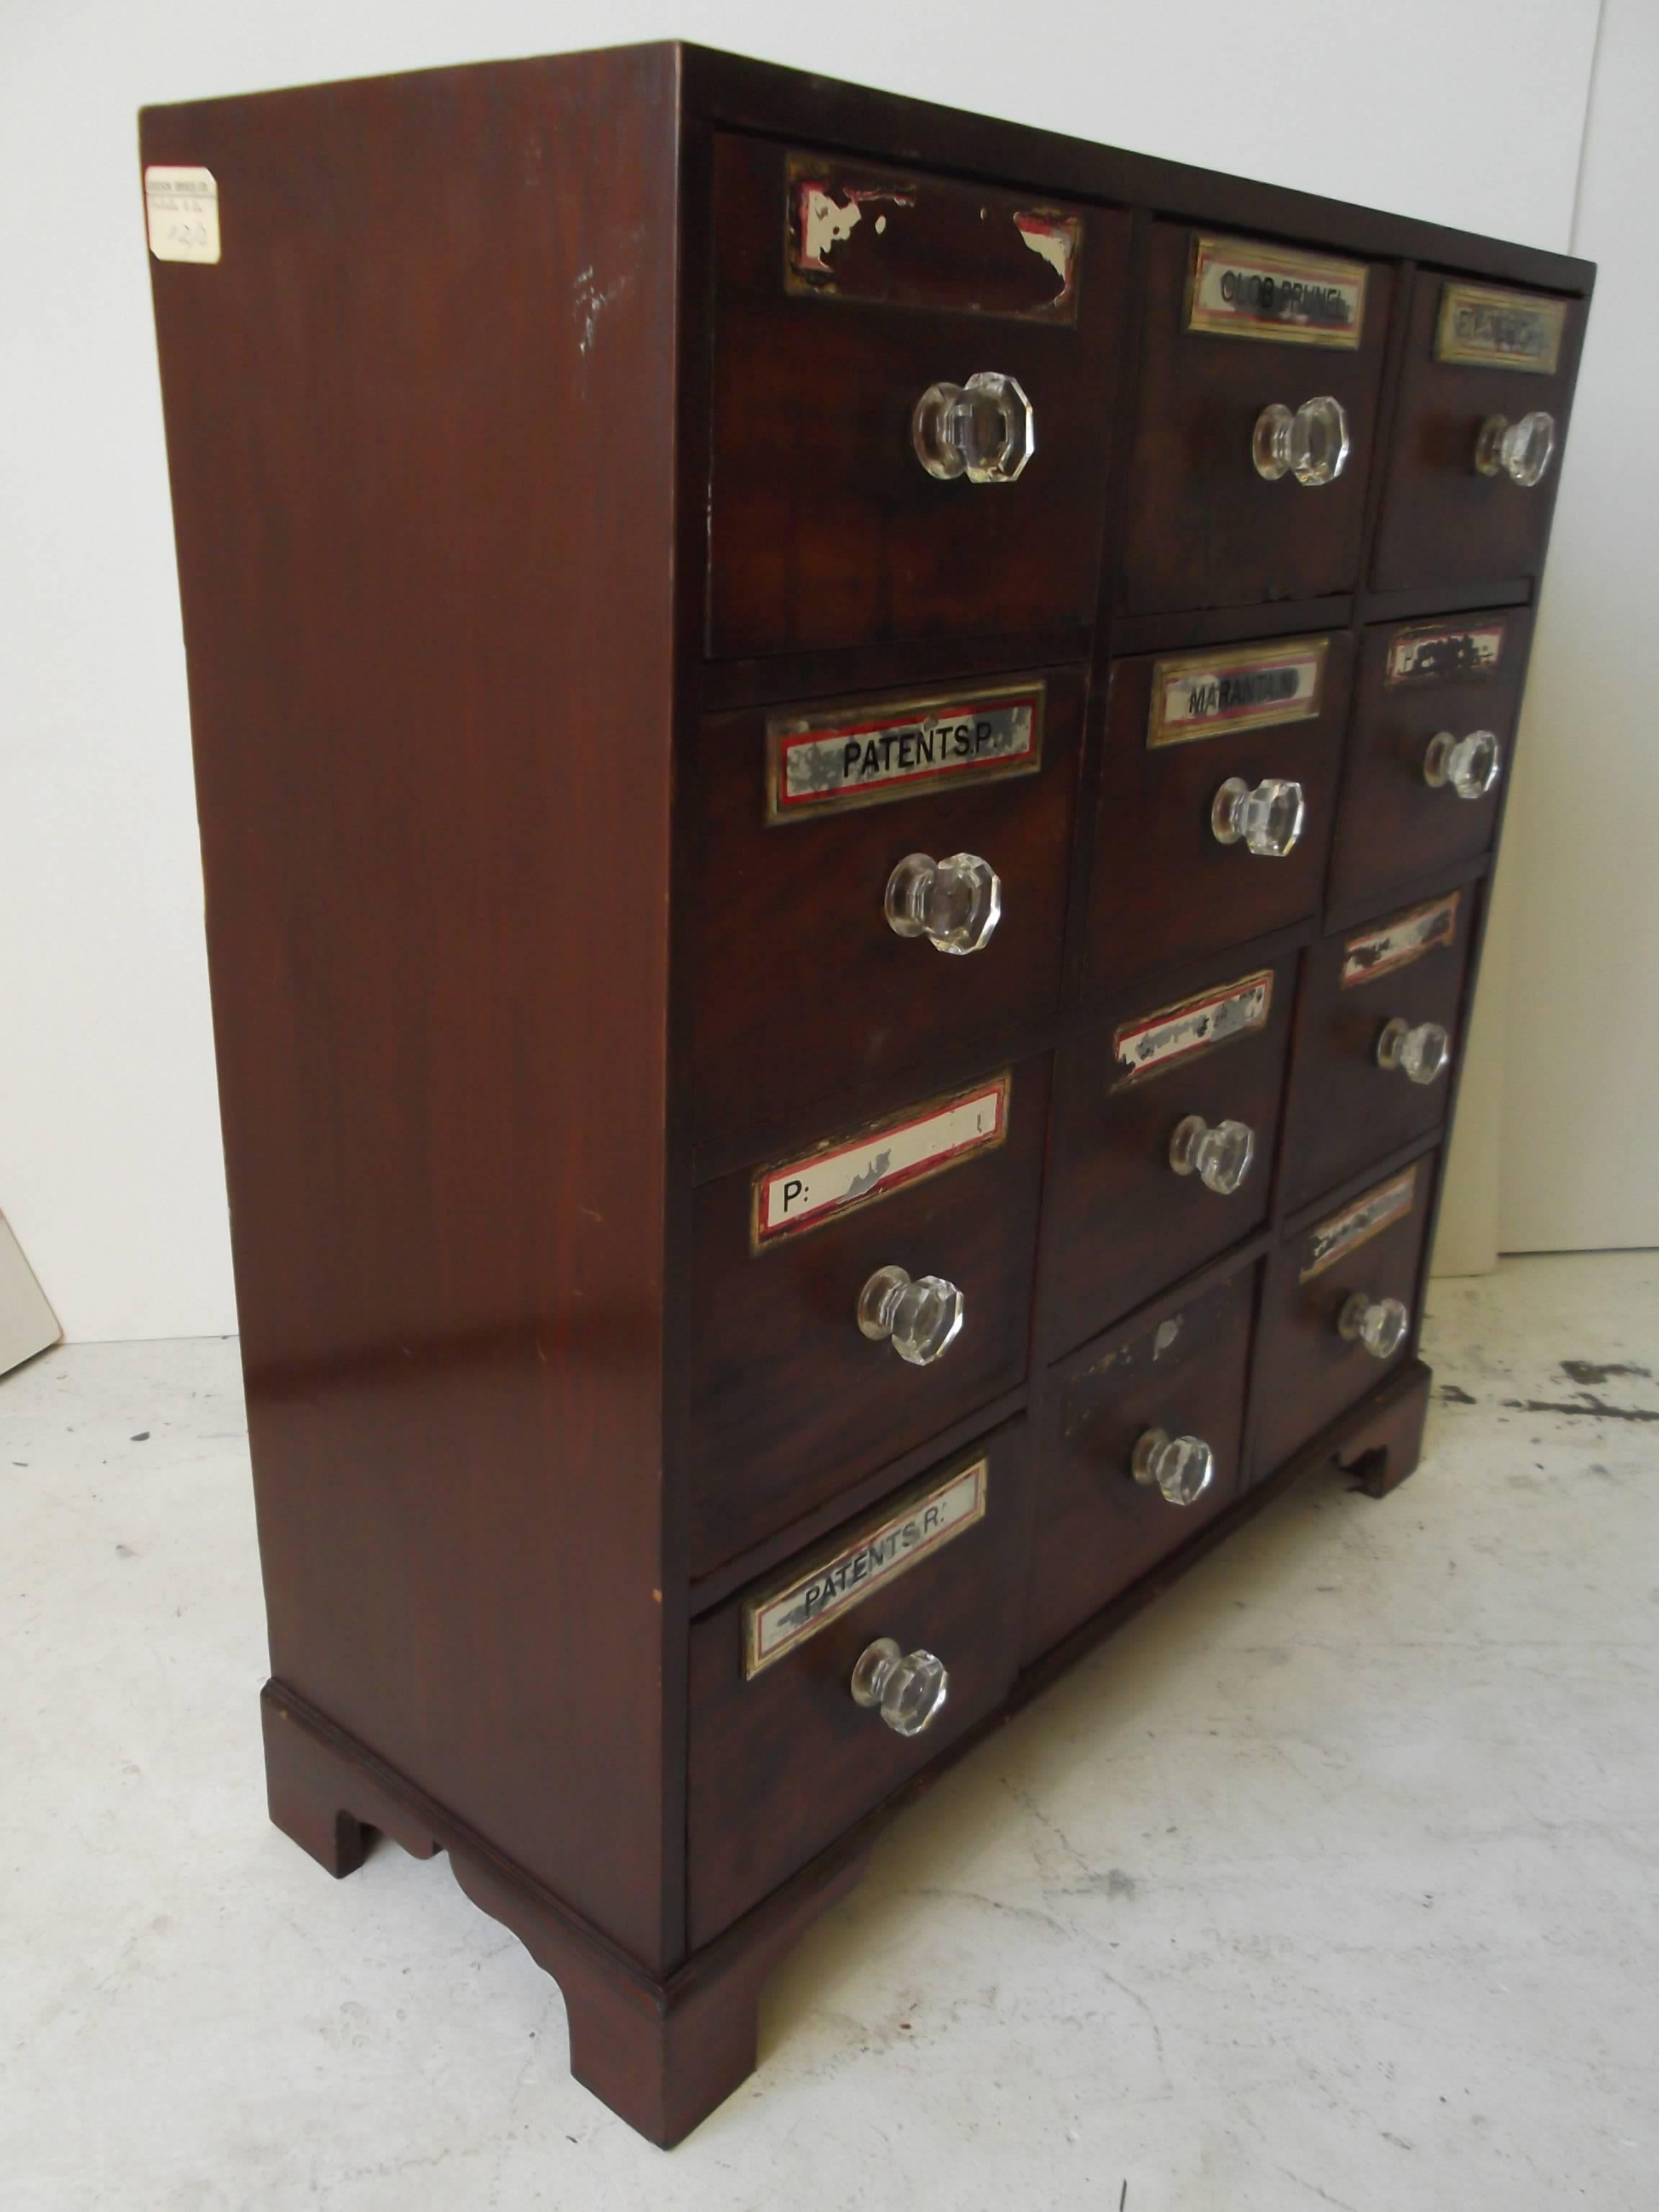 This is a wonderful smaller antique apothecary chest with 12 drawers. It is in mahogany, circa 1850. It retains glass knobs and several of the reverse painted mirror labels. It is believed to be English in origin. The construction is nice, with old